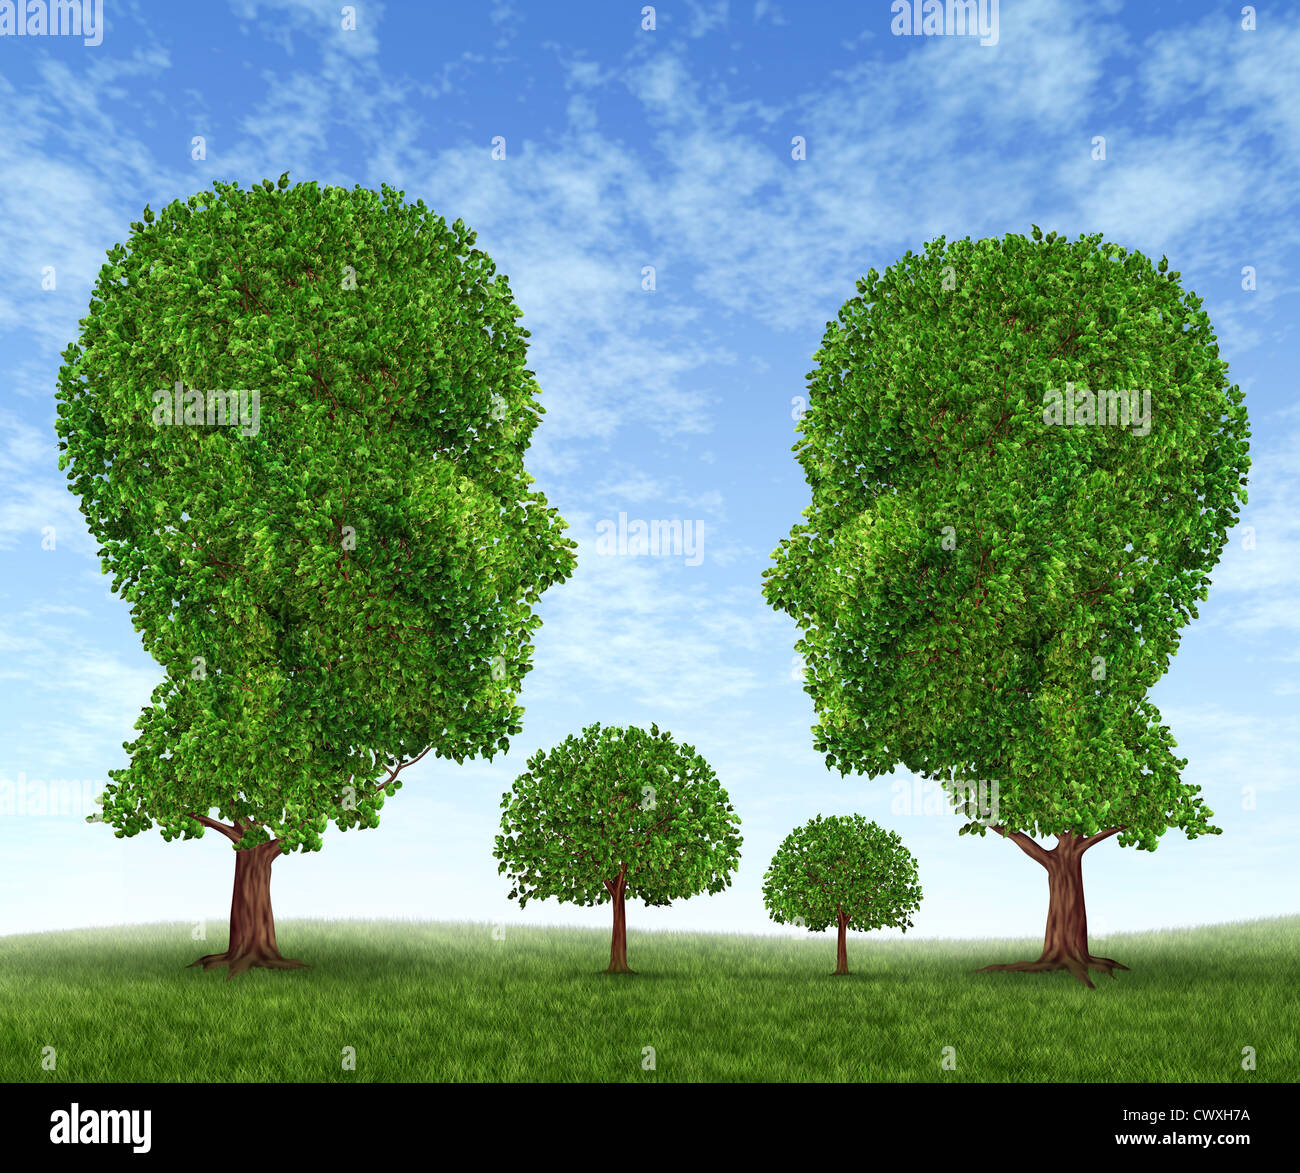 Growing family with a father mother son and daughter in the shape of tree symbols with green leaves on a blue sky showing the growth in domestic life relationship and the social challenges of the new society. Stock Photo